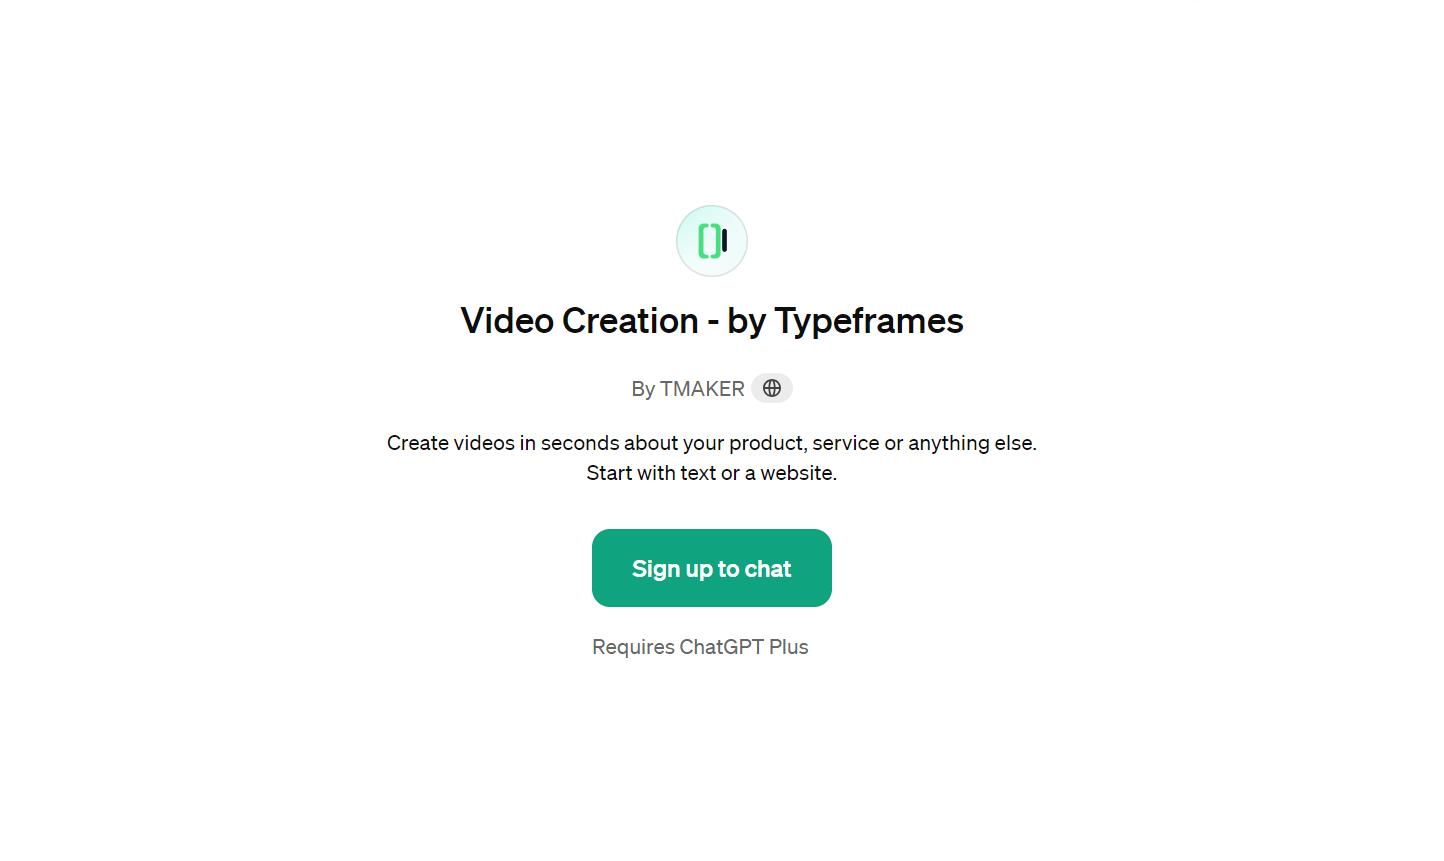 Video Creation - by Typeframes for Convenient Video Creation